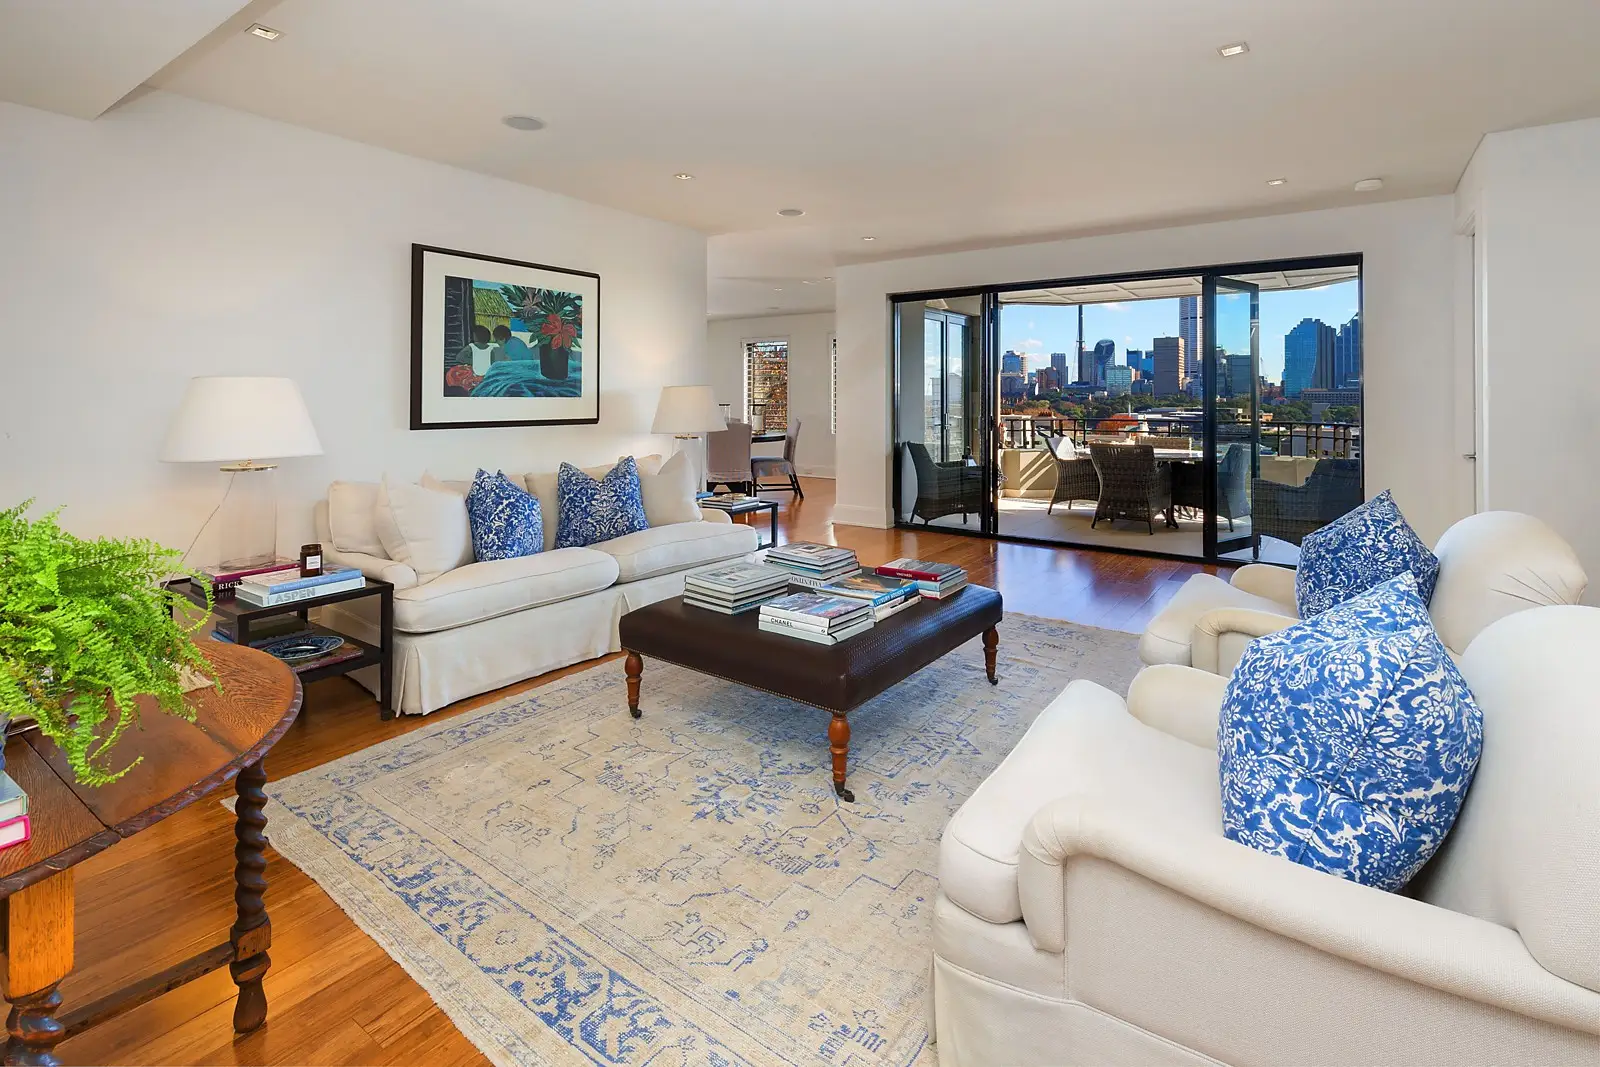 Photo #2: 602/14 Macleay Street, Potts Point - Sold by Sydney Sotheby's International Realty